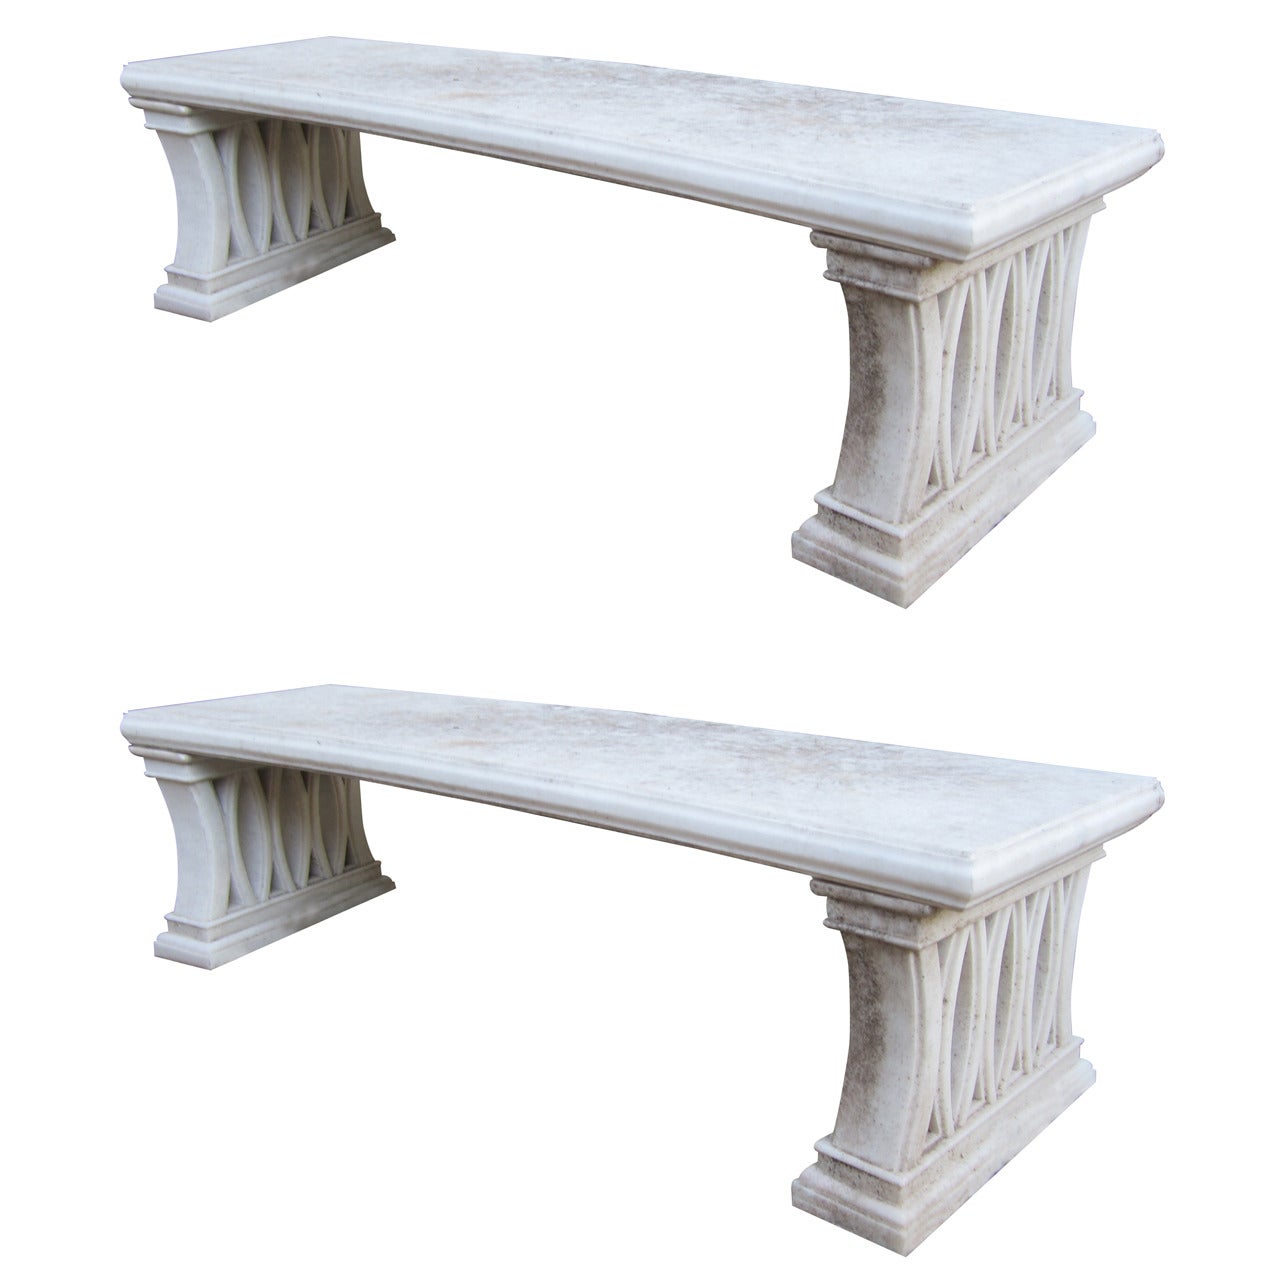 Pair of Indian White Marble Benches